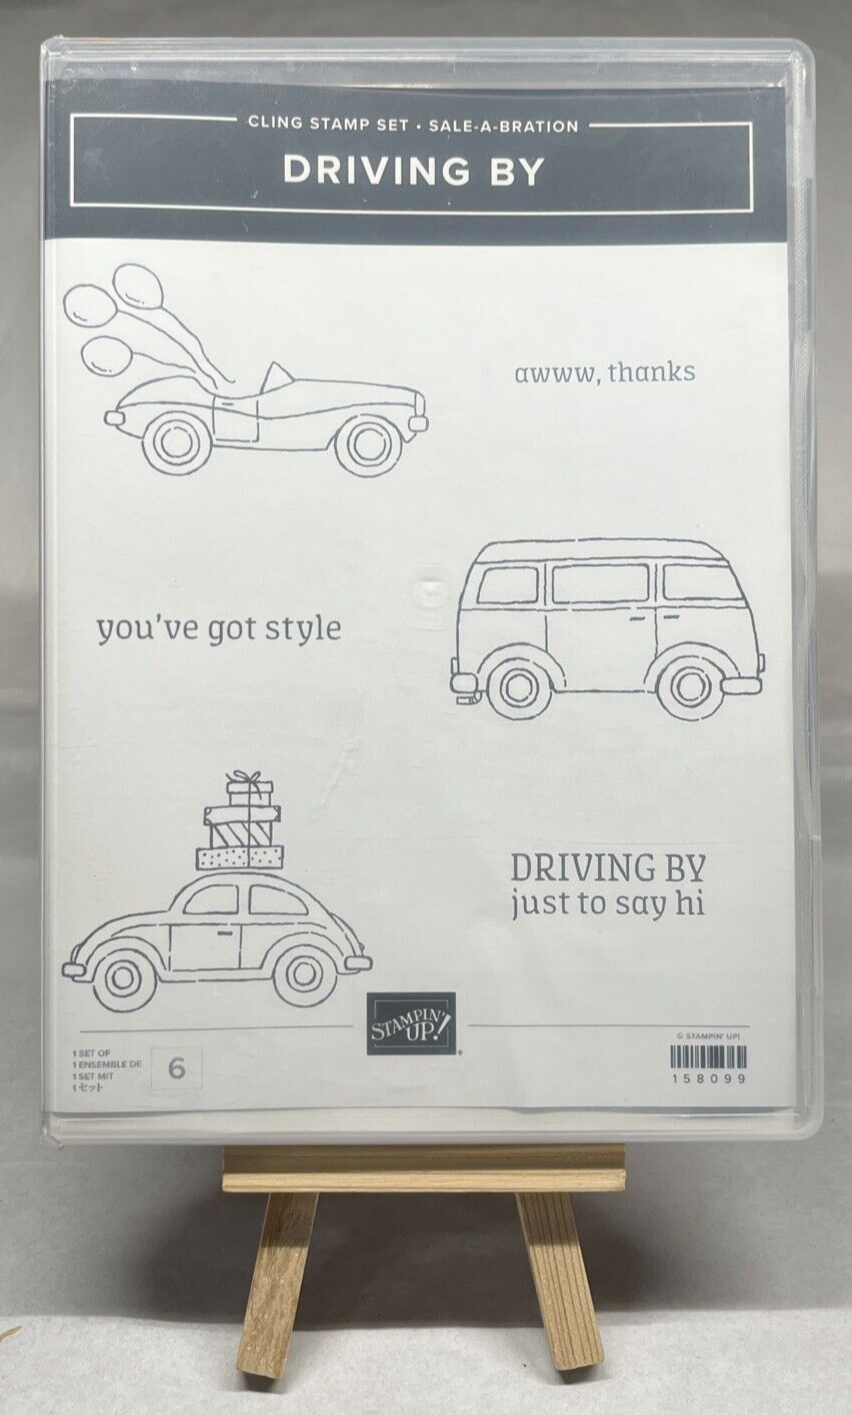 Stampin Up Cling Stamp Set Driving By VW Bus Car Say Hi Thanks New - $6.50